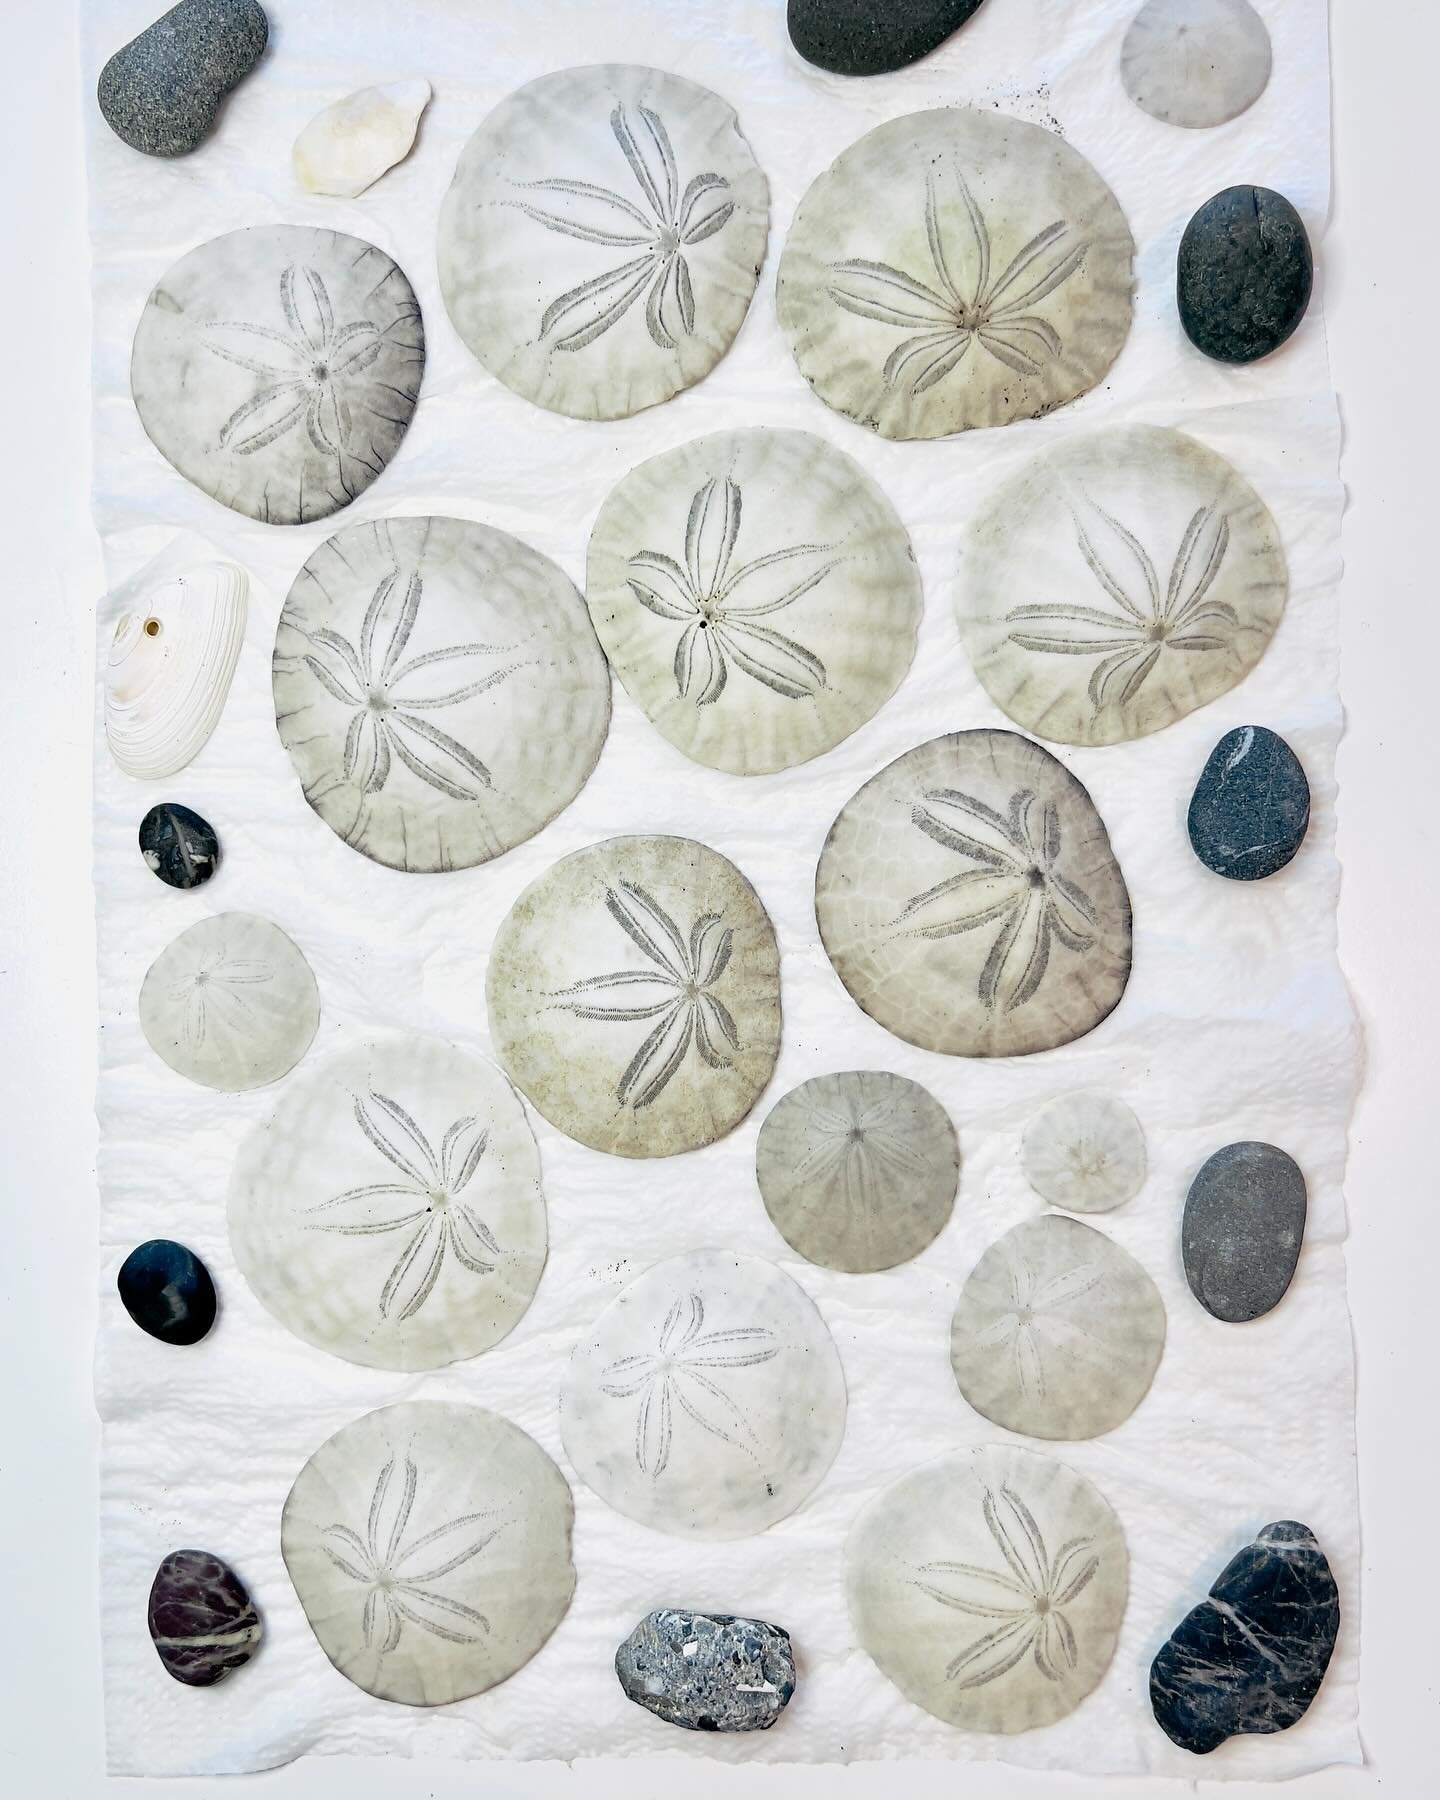 The sand was covered with chunks of sand dollars, a huge number of whole sand dollars, and a few interesting rocks on last week&rsquo;s beach walk in San Francisco. I wasn&rsquo;t going to collect any but my pockets soon became full. I did pranayama 